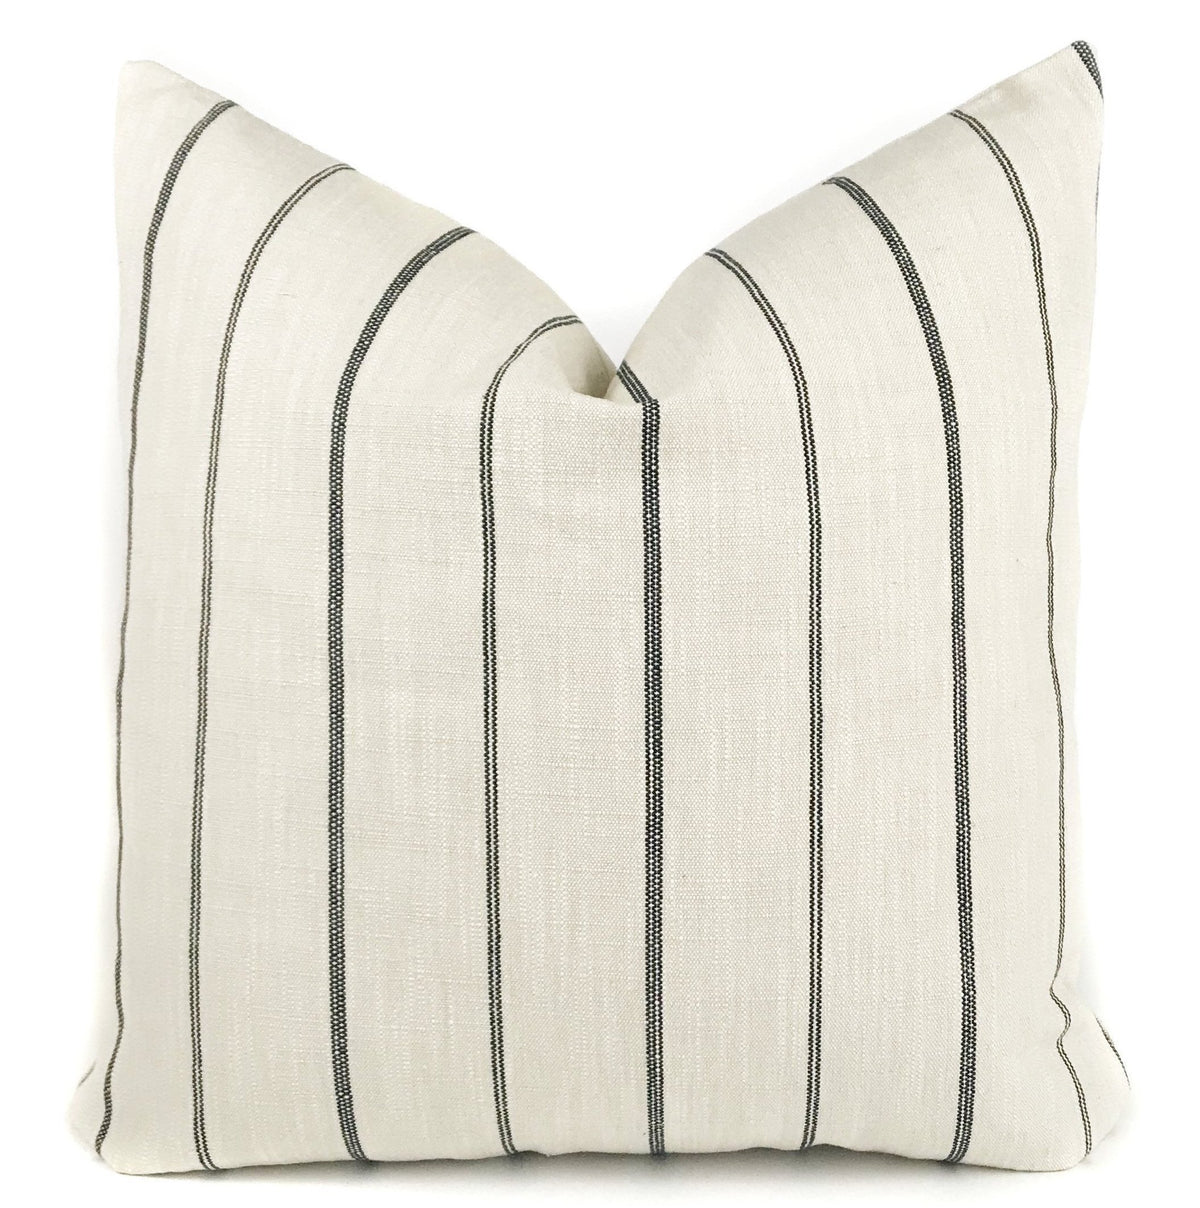 Pillow Combination #10 | 4 Pillow Covers